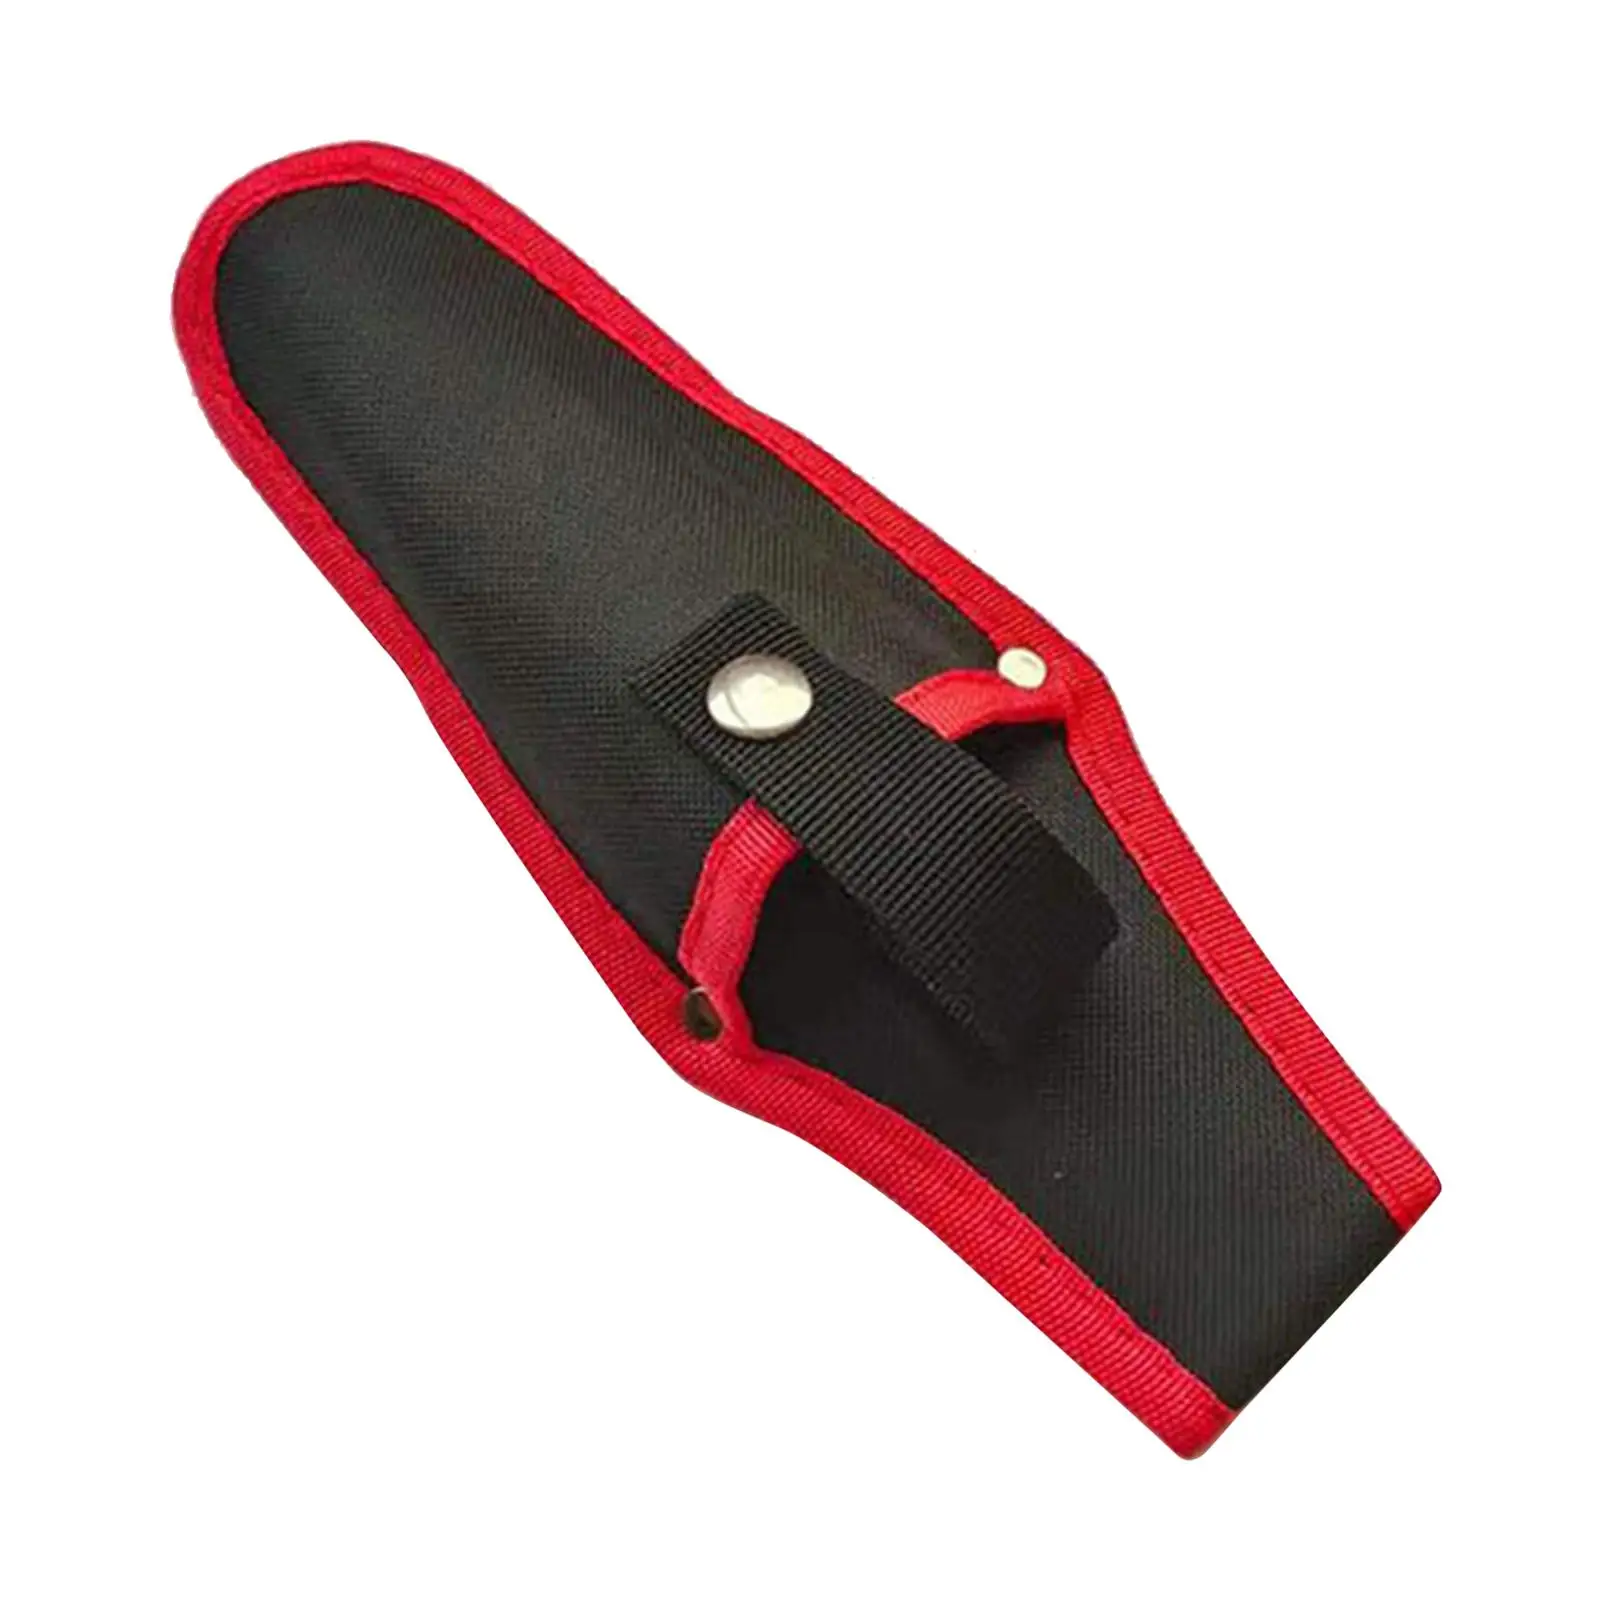 Pruner Sheath Protective Case Tool Belt Accessory Pruning Shear Holster for Pliers Shears Scissors Plant Shear Trimming Tools